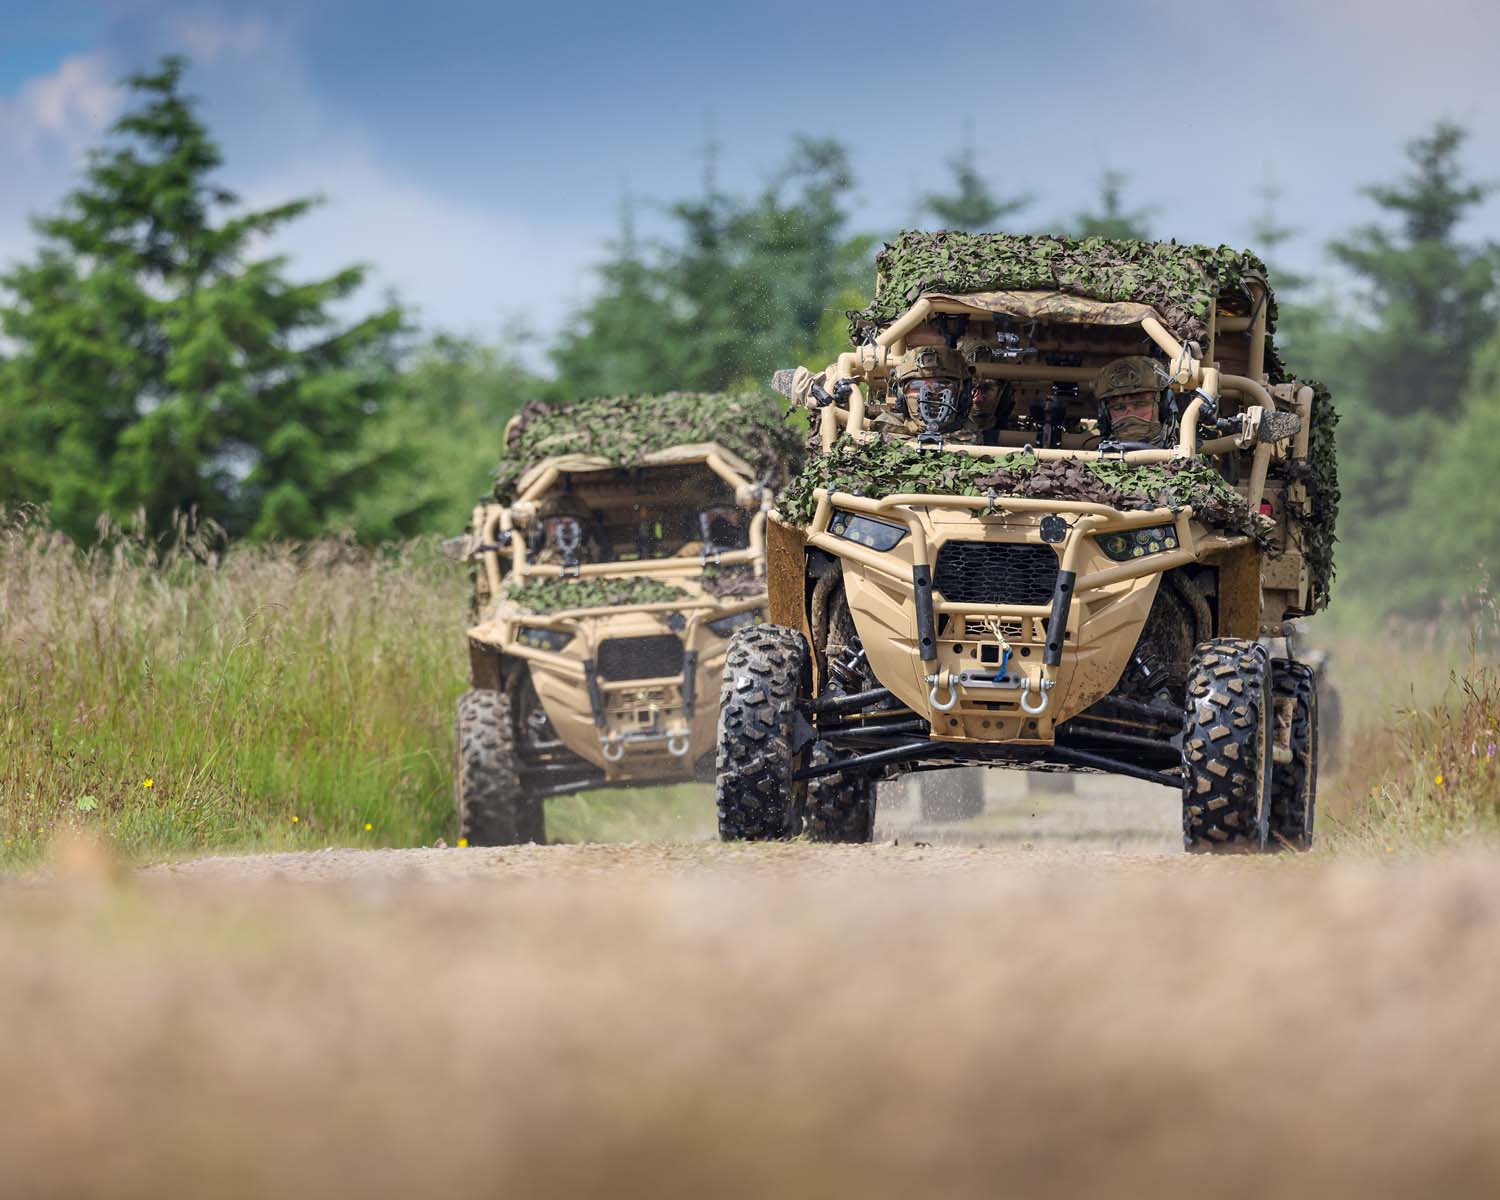 American-made Polaris MRZR-D Ultralight 4x4 Off-roader Tested by Royal Marines